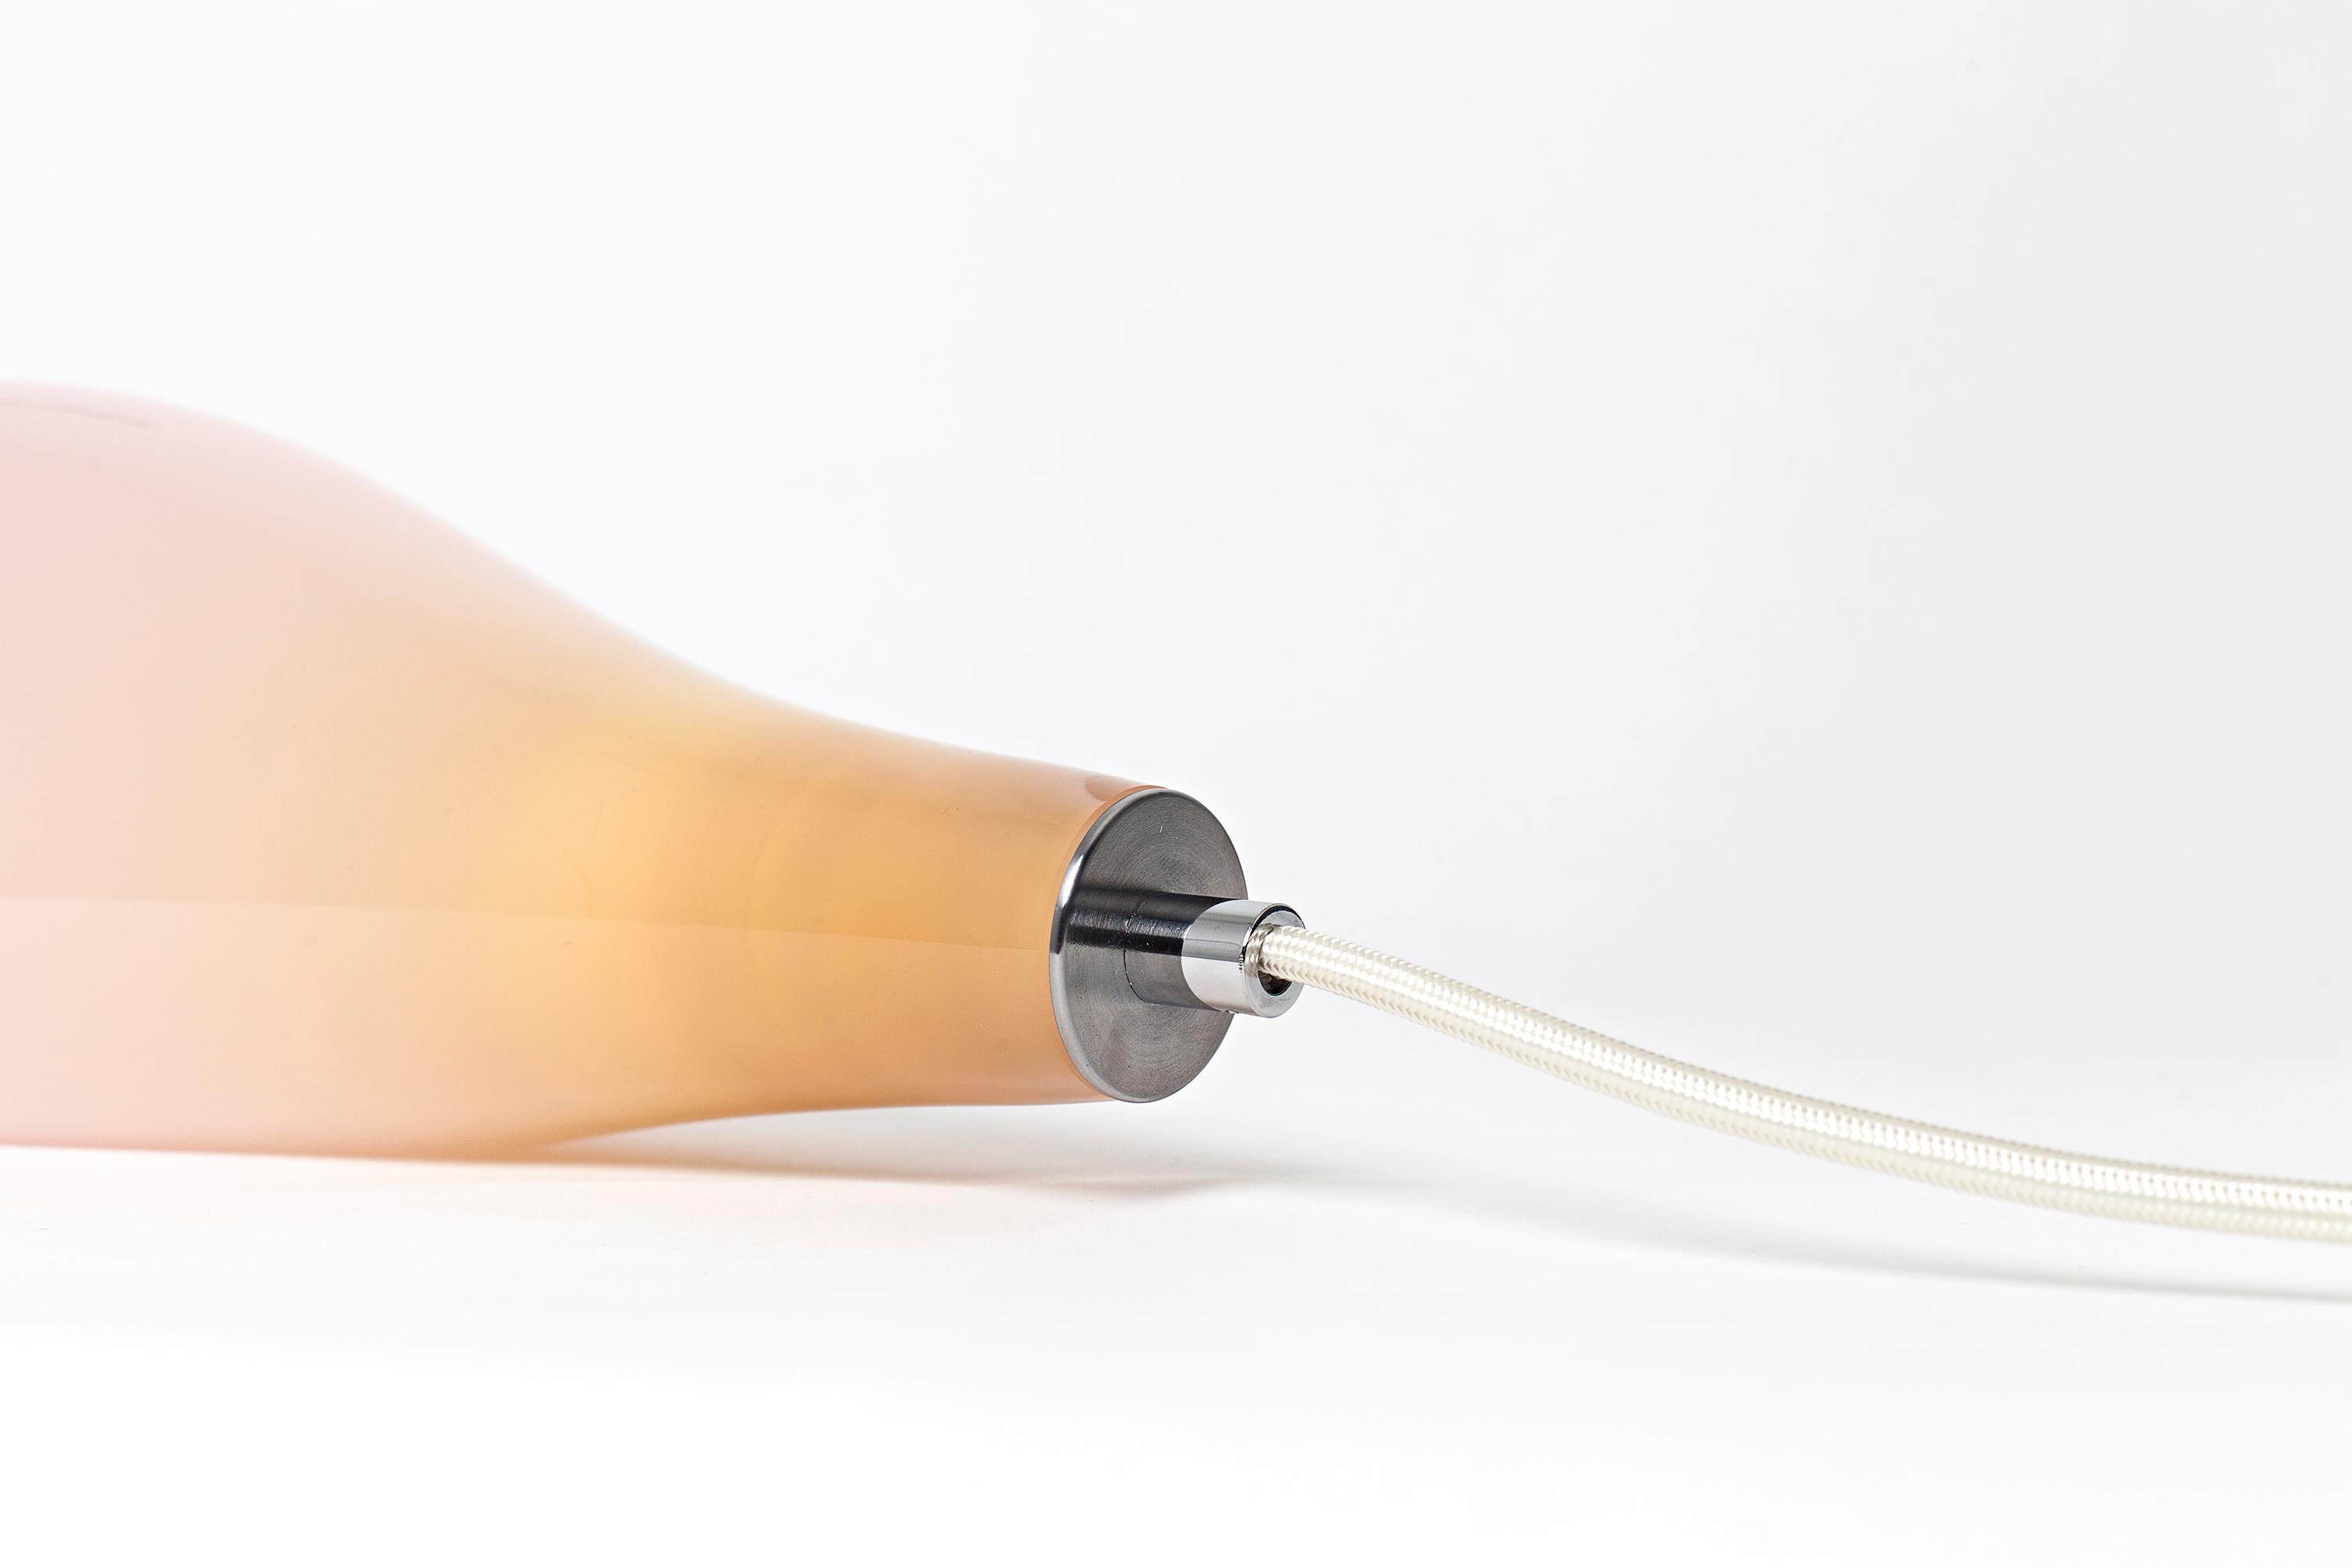 Leech is the result of a relationship of mutual benefit that blurs the boundary between an object and a living organism. The leech-like glass lamp is mouth blown in Sweden, designed to embrace all the natural and organic qualities of the mouth blown